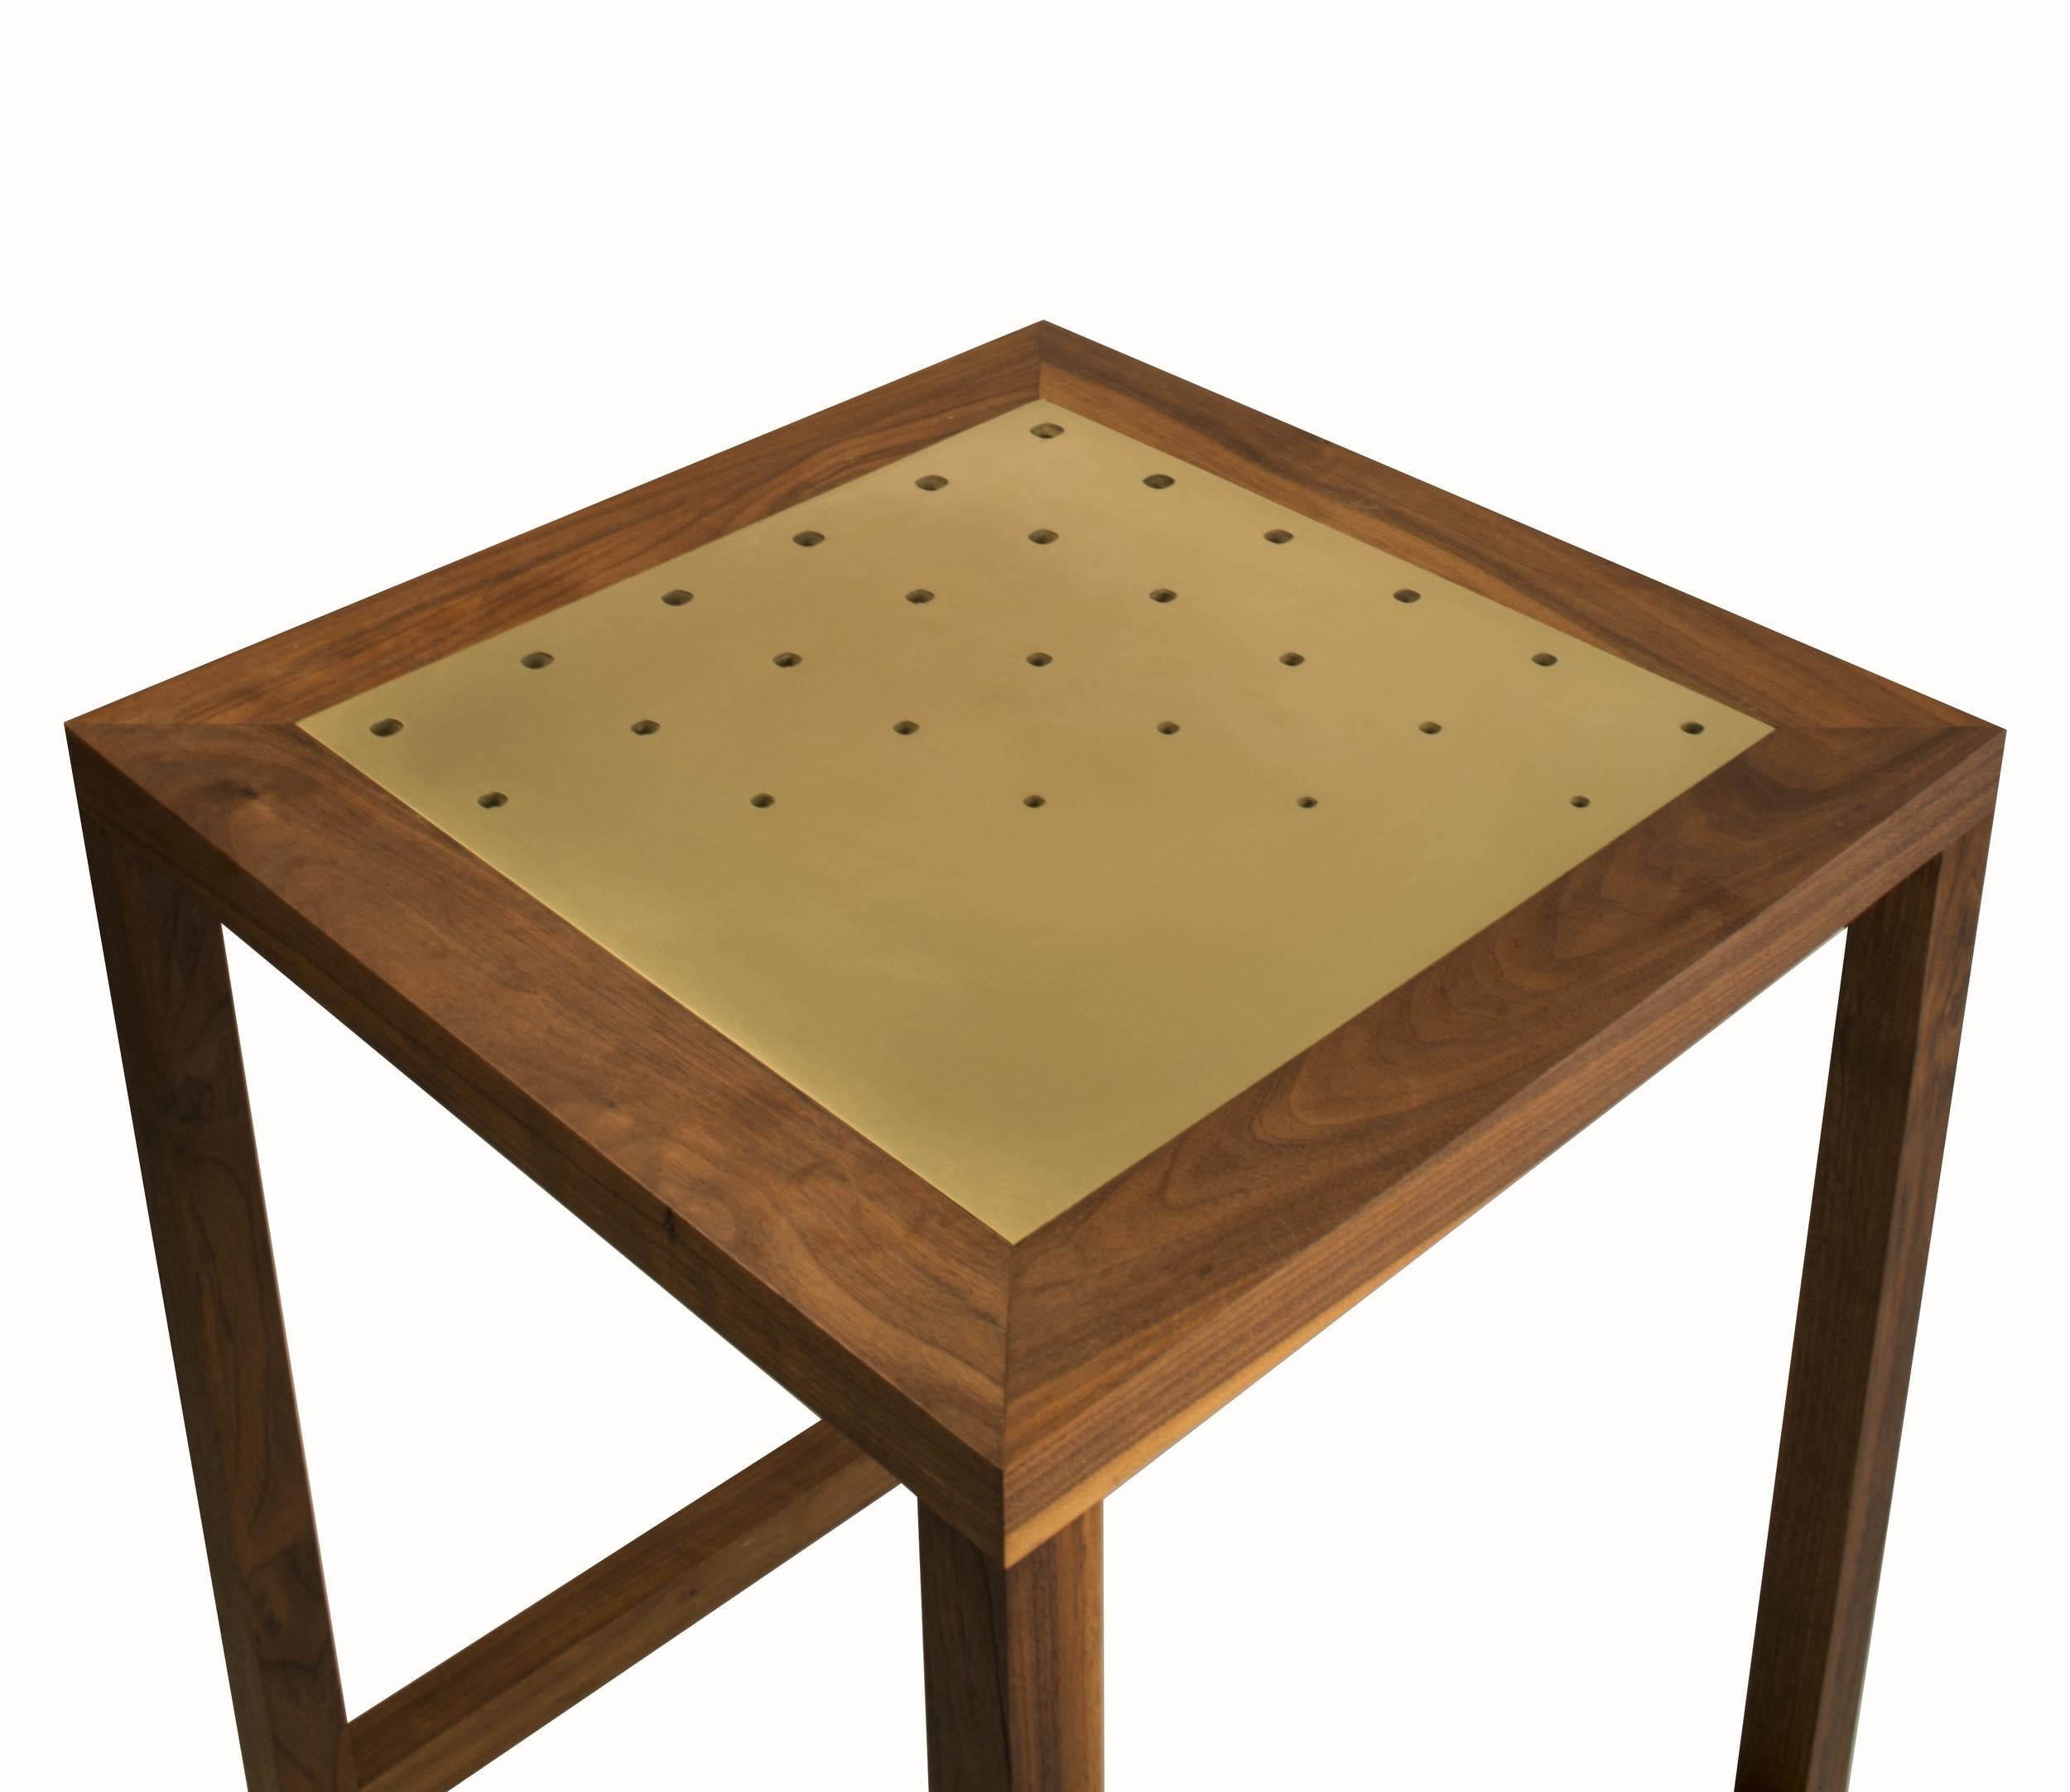 The Amplitude end table features a solid walnut frame inlaid with a brass panel. The clean geometric lines and gradating hole pattern produce a simple yet dynamic form, well suited to highlight the natural beauty of the materials. Please see the